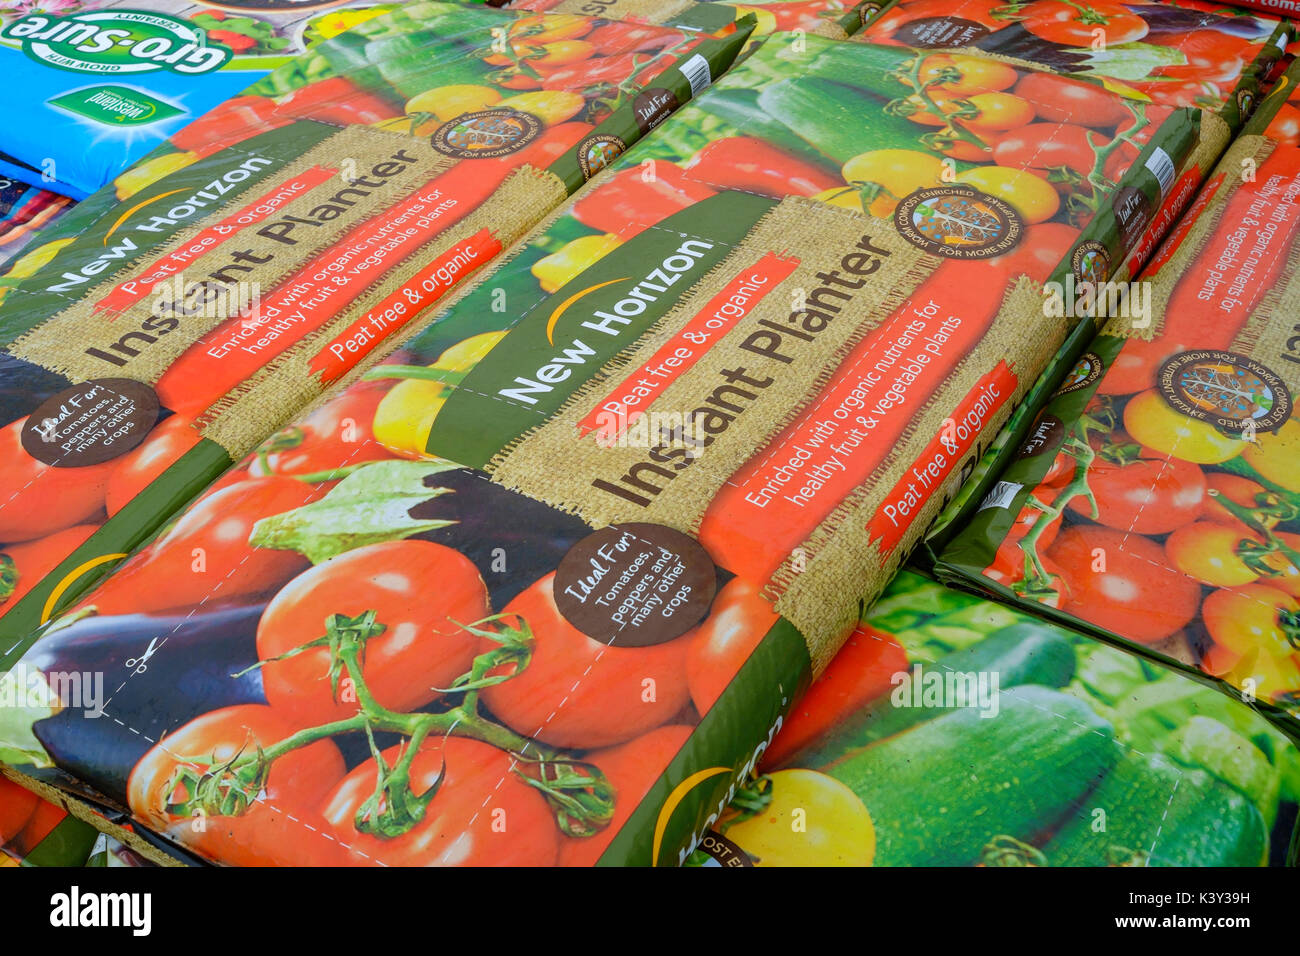 A stack of extra large New Horizon Instant Planter  grow bags in a garden centre used for growing tomato plants peppersor other similar plants Stock Photo